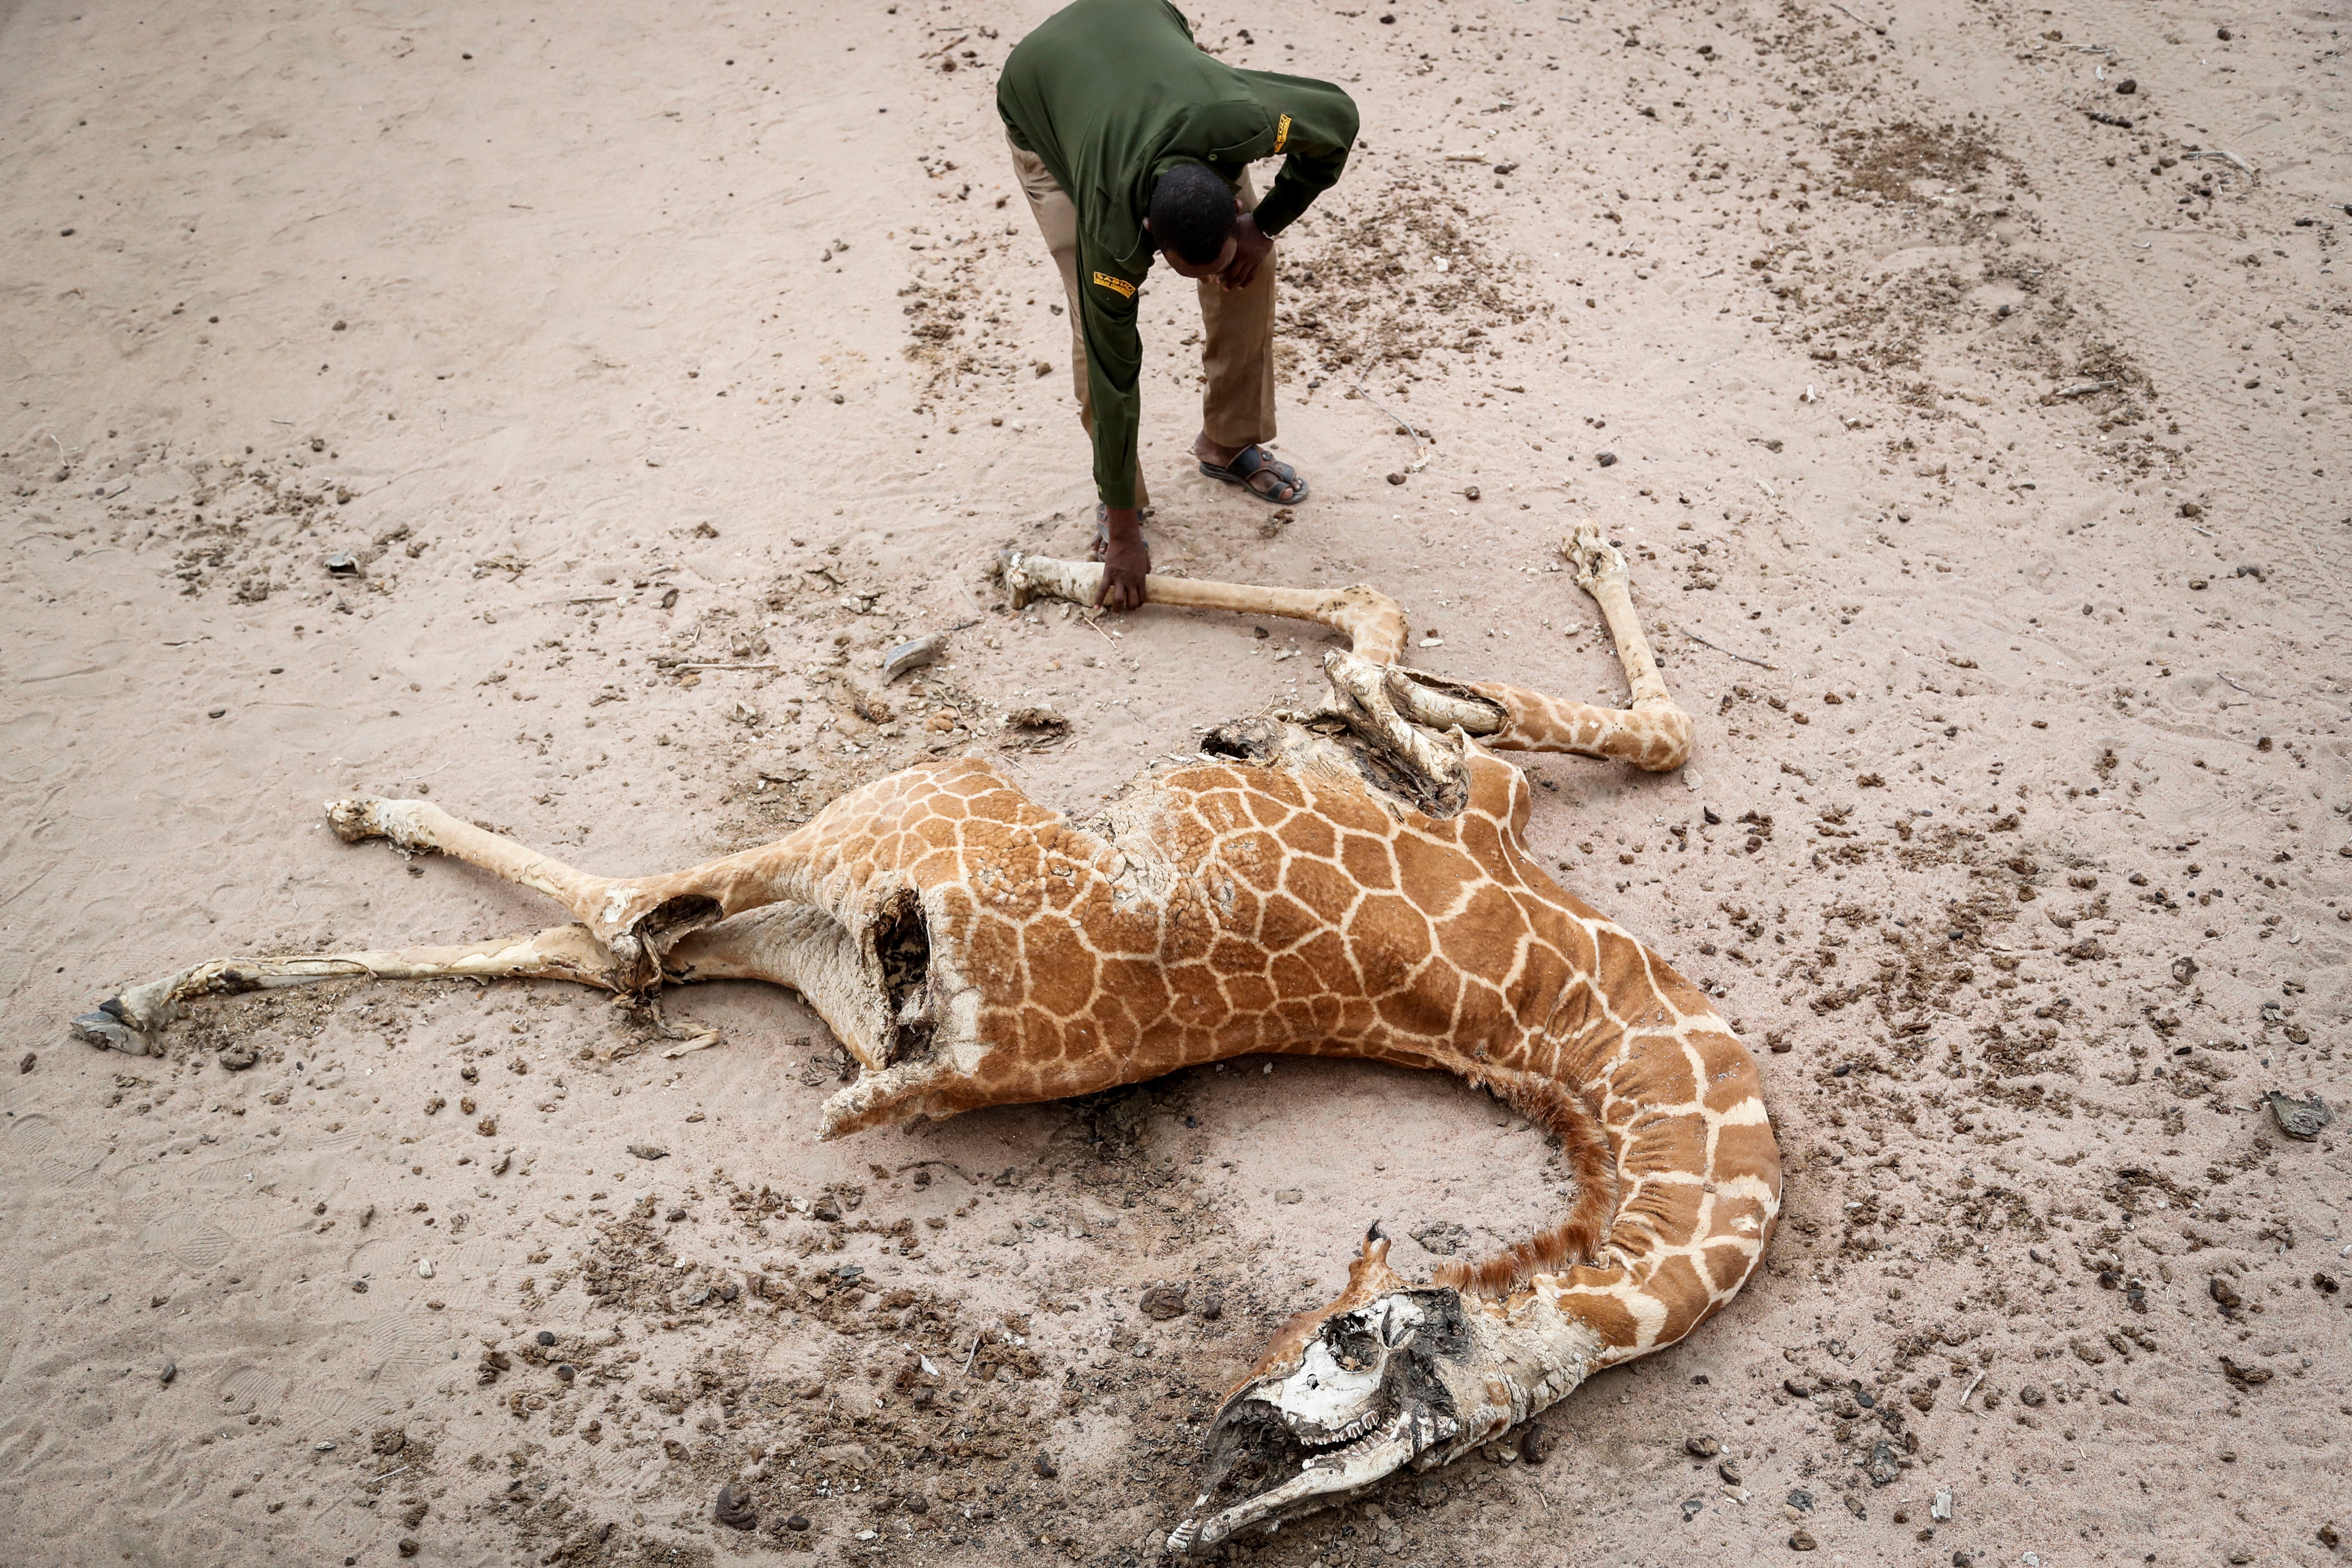 Mohamed Mohamud, a ranger from the Sabuli Wildlife Conservancy, looks at the carcass of a giraffe that died from hunger